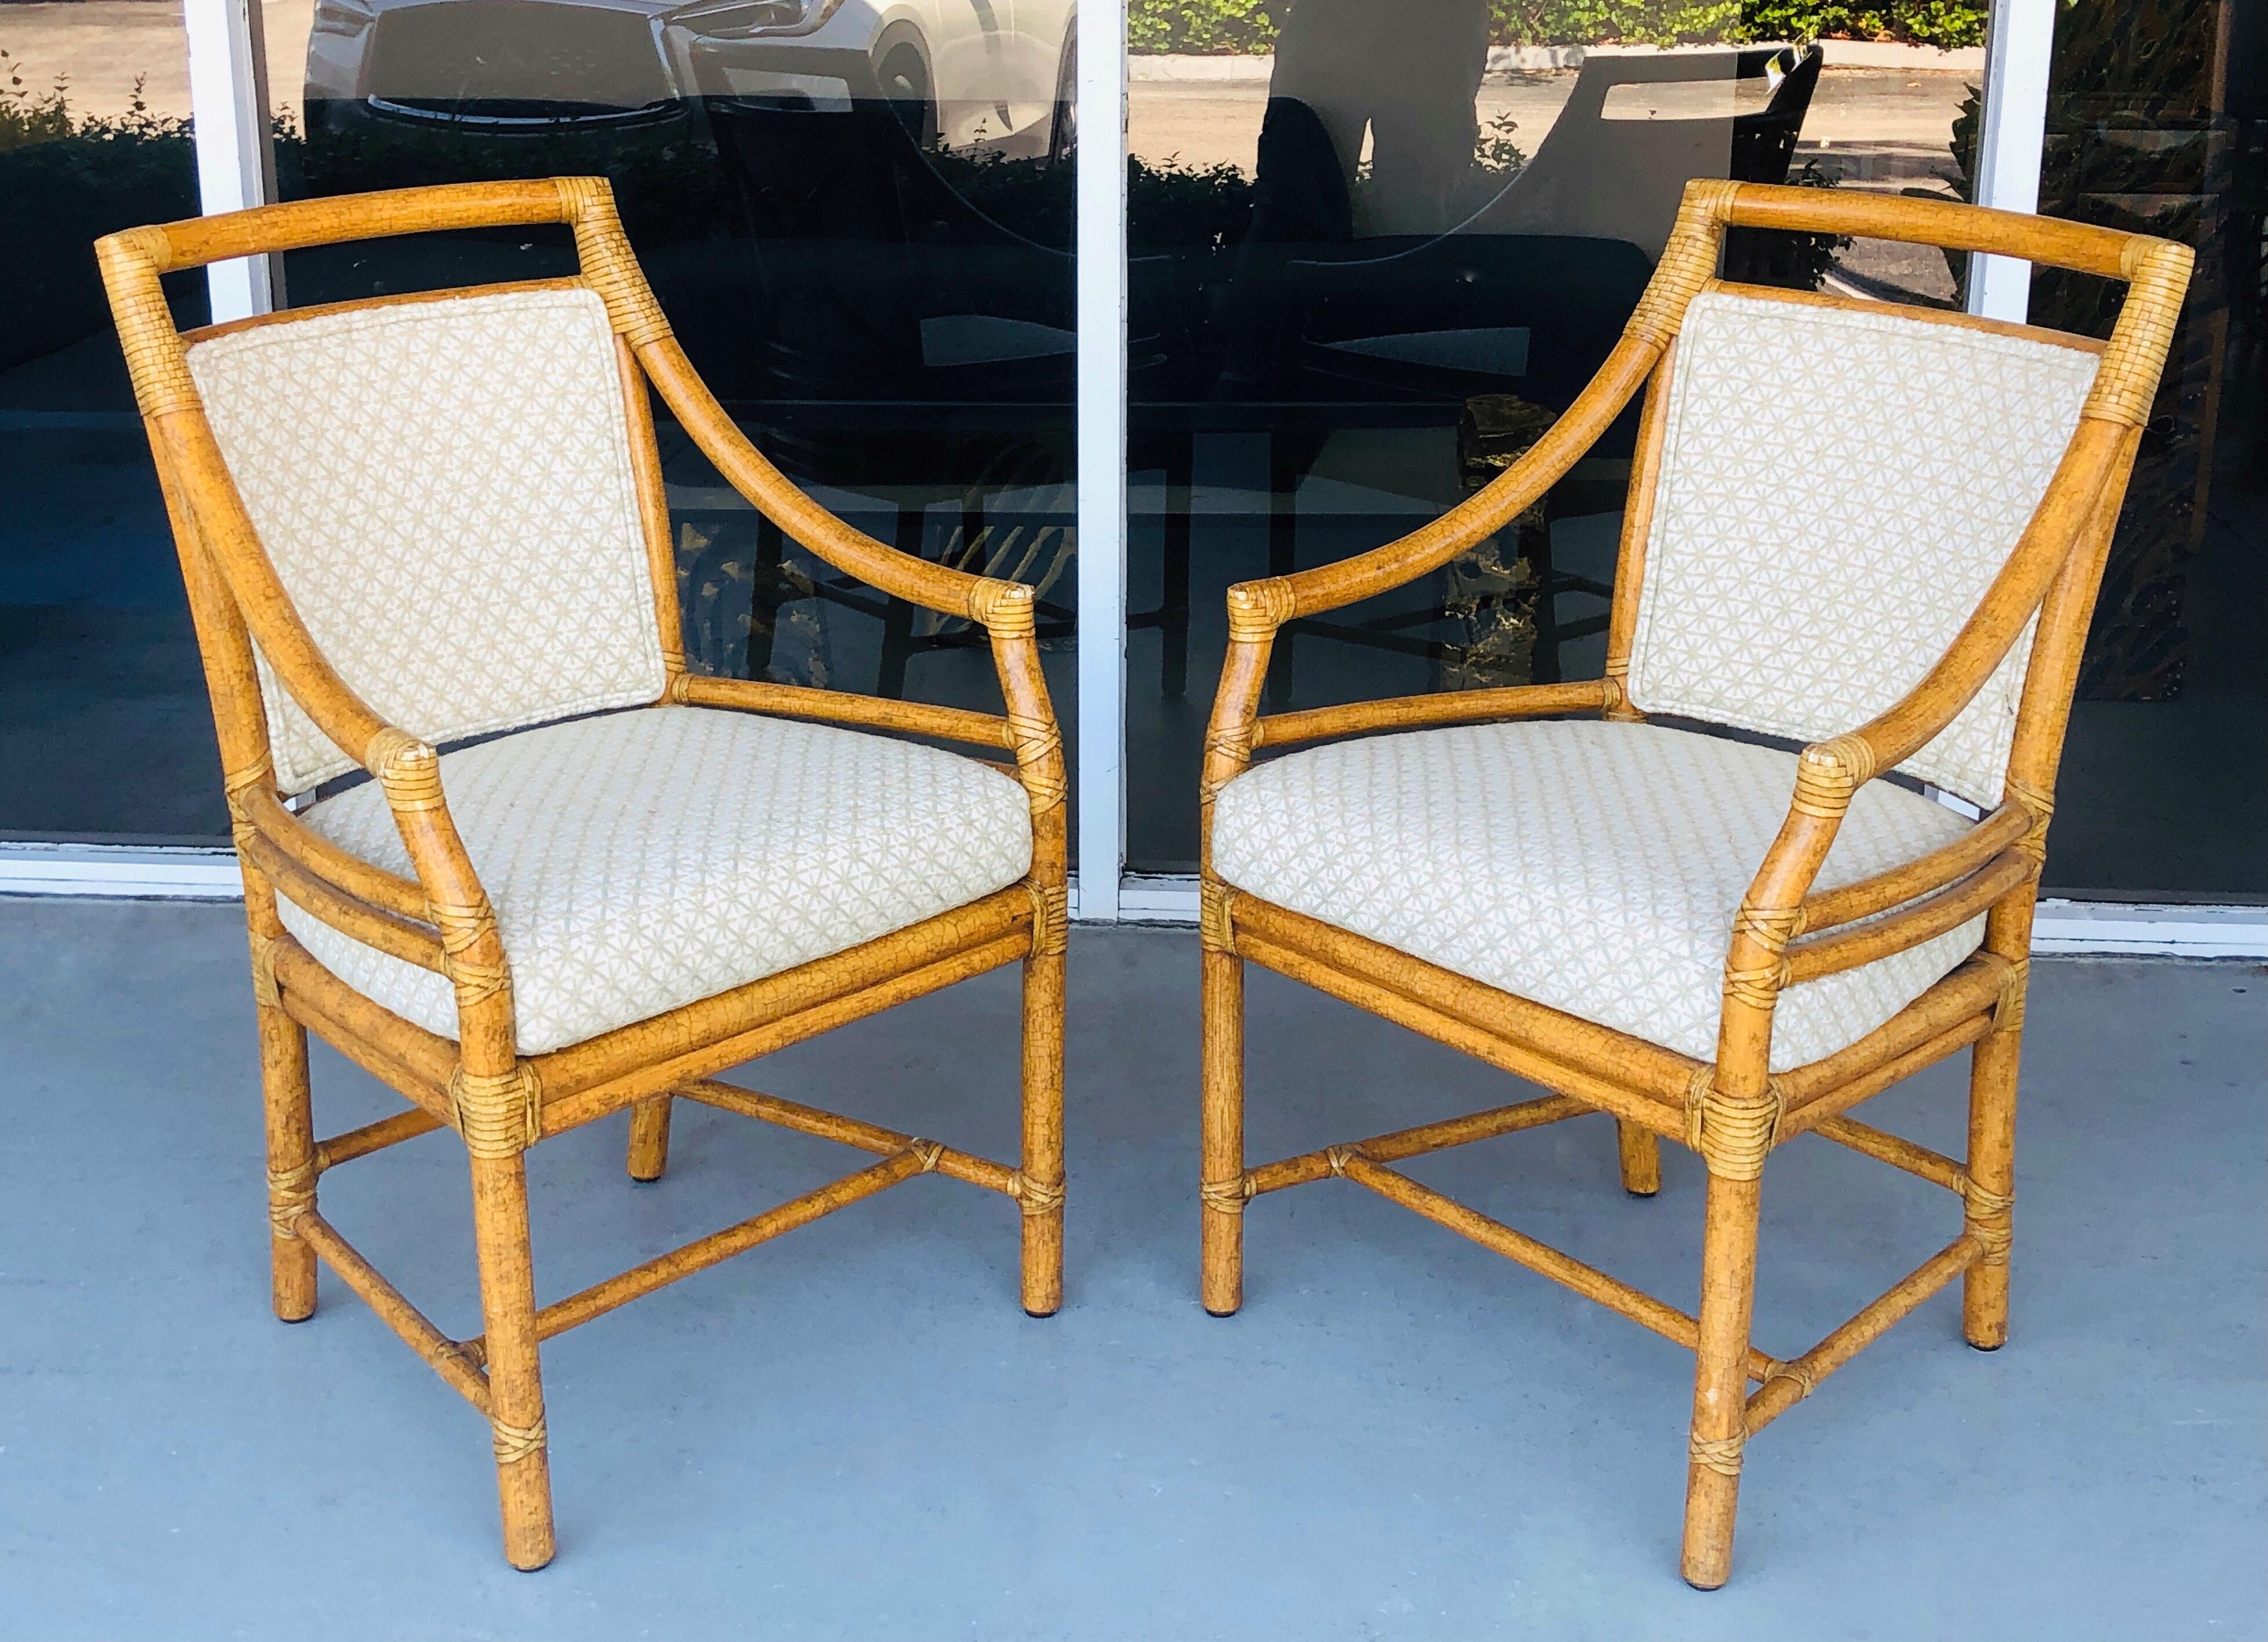 A pair of McGuire Rattan arm chairs. 3 pairs available. Note the beautiful custom finish and embroider upholstery.